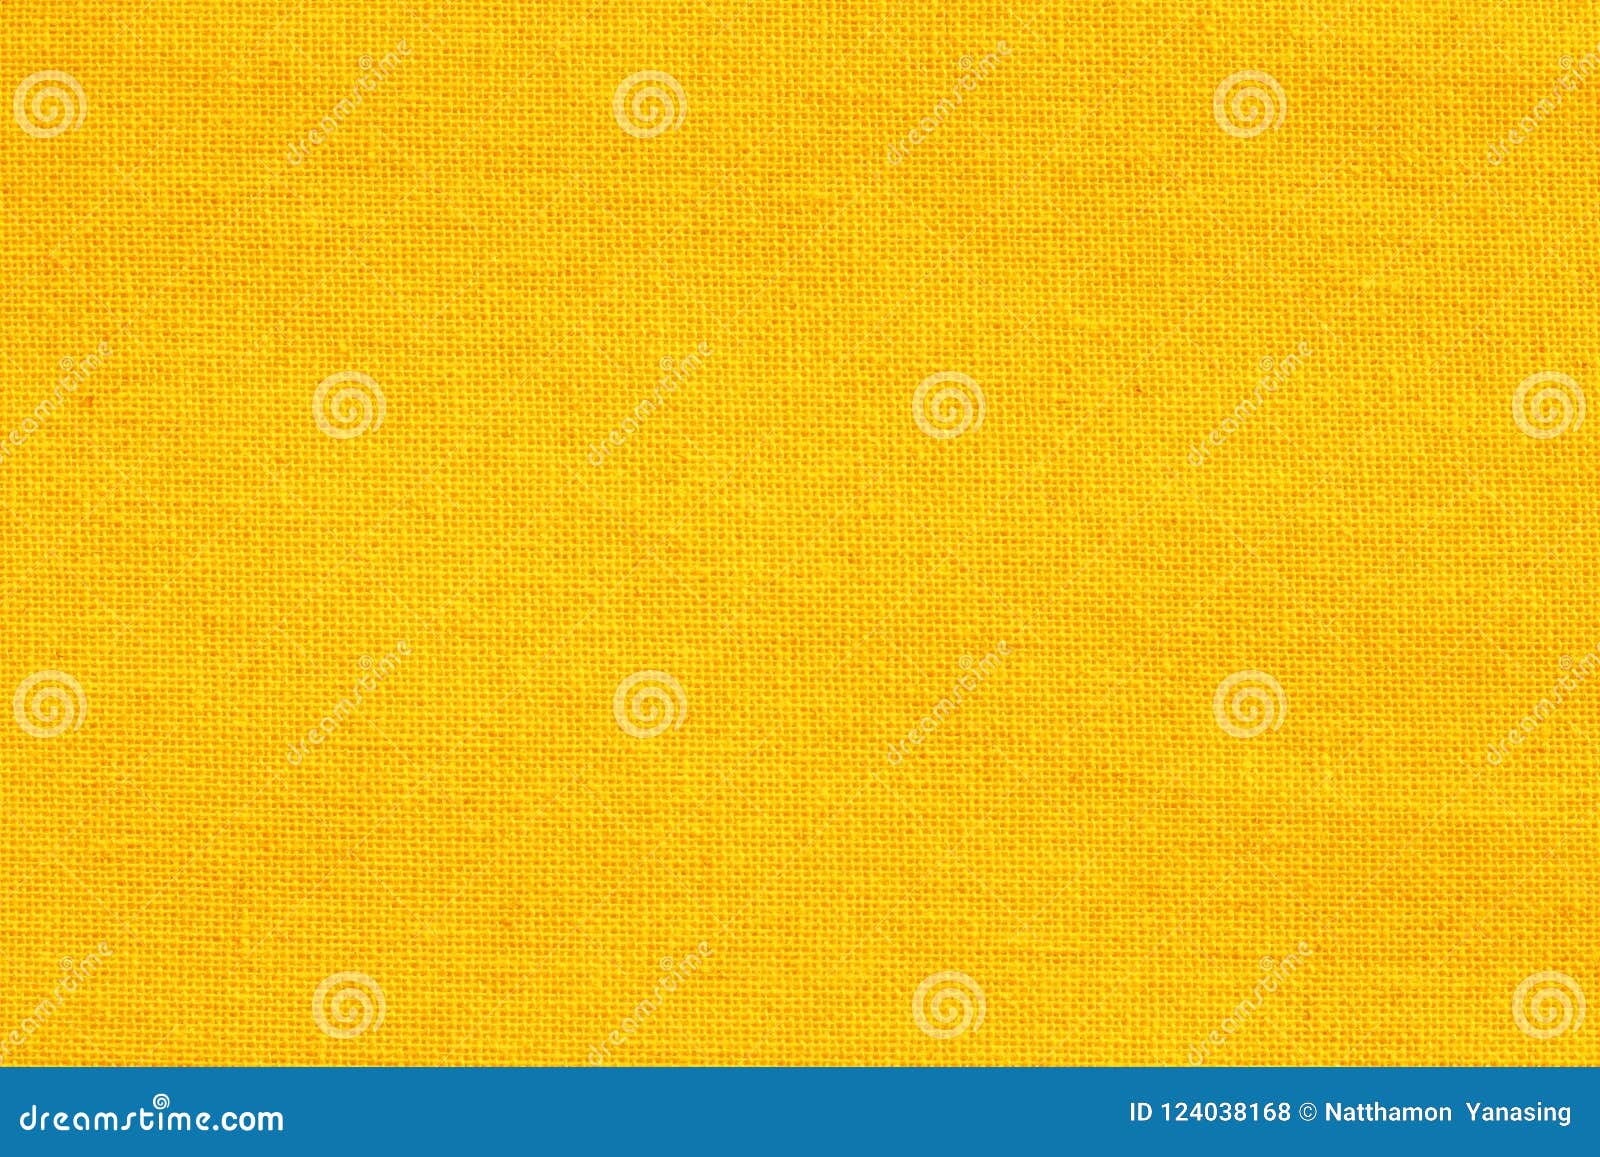 Yellow Cotton Fabric Texture Background, Seamless Pattern of Natural ...